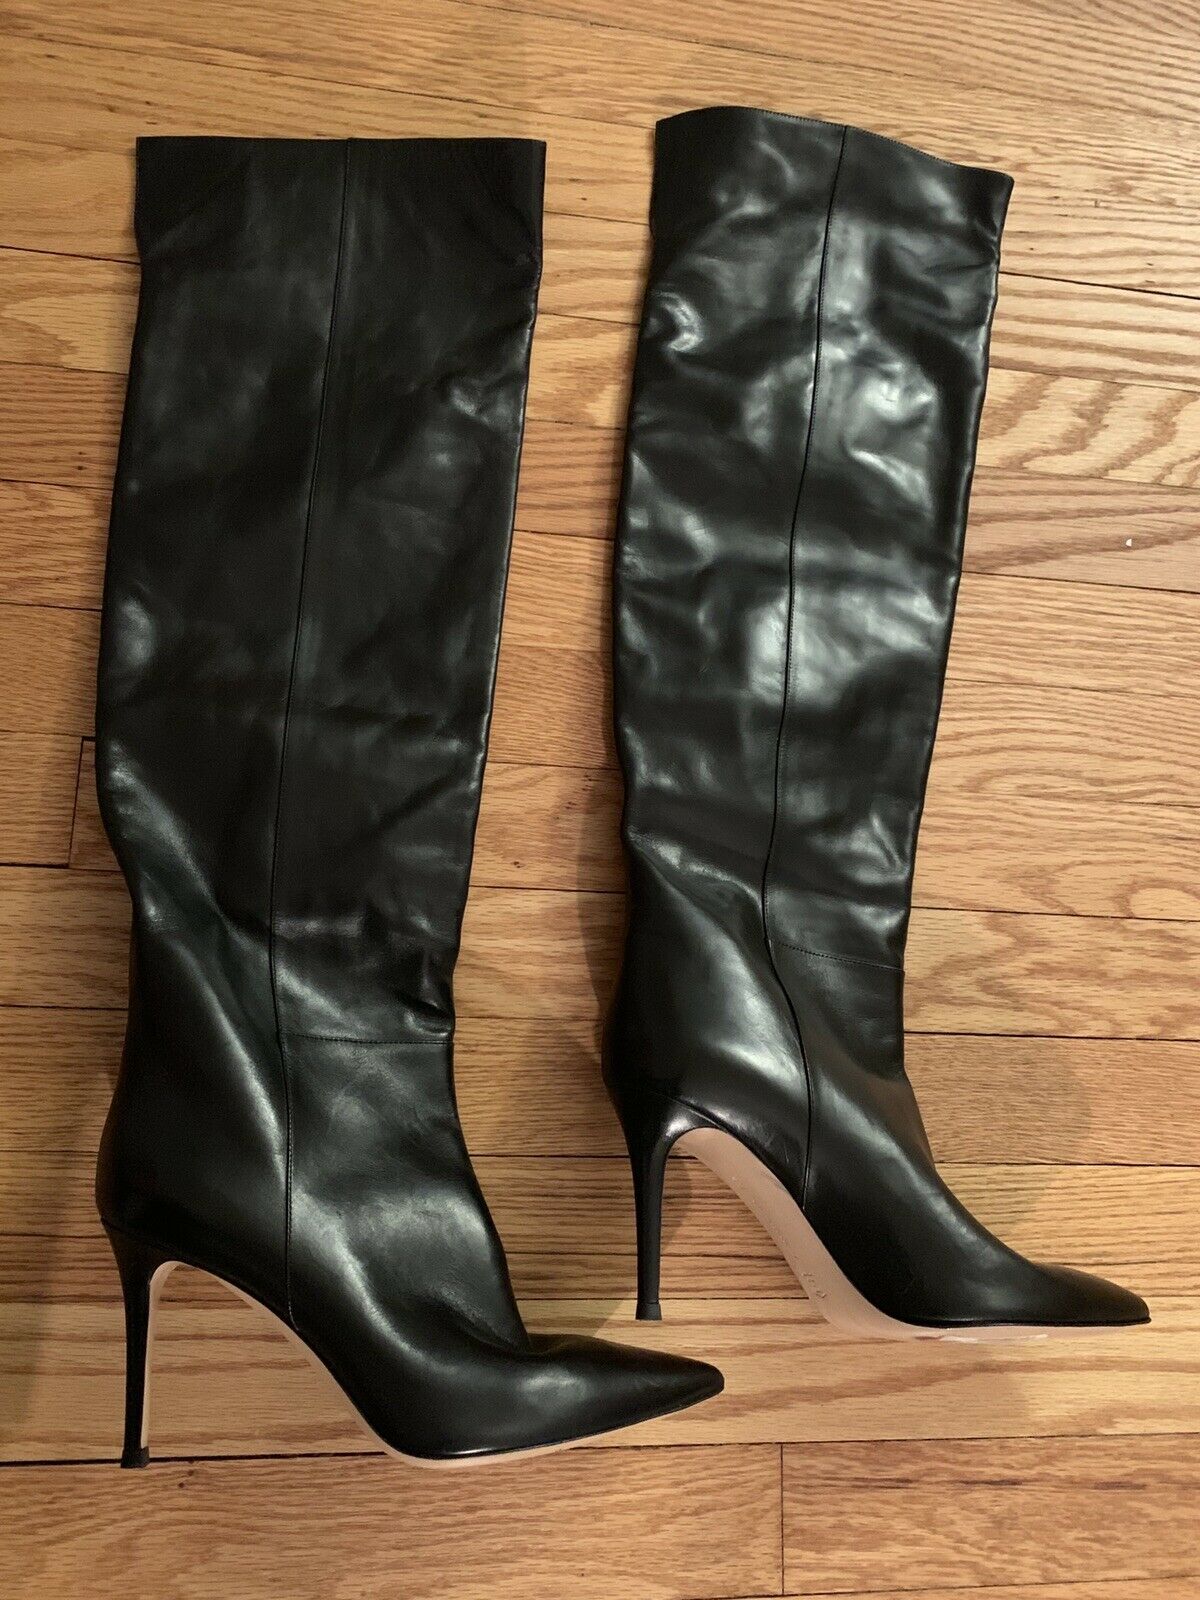 eBay Leather: Gianvito Rossi over-the-knee boots nicely modeled